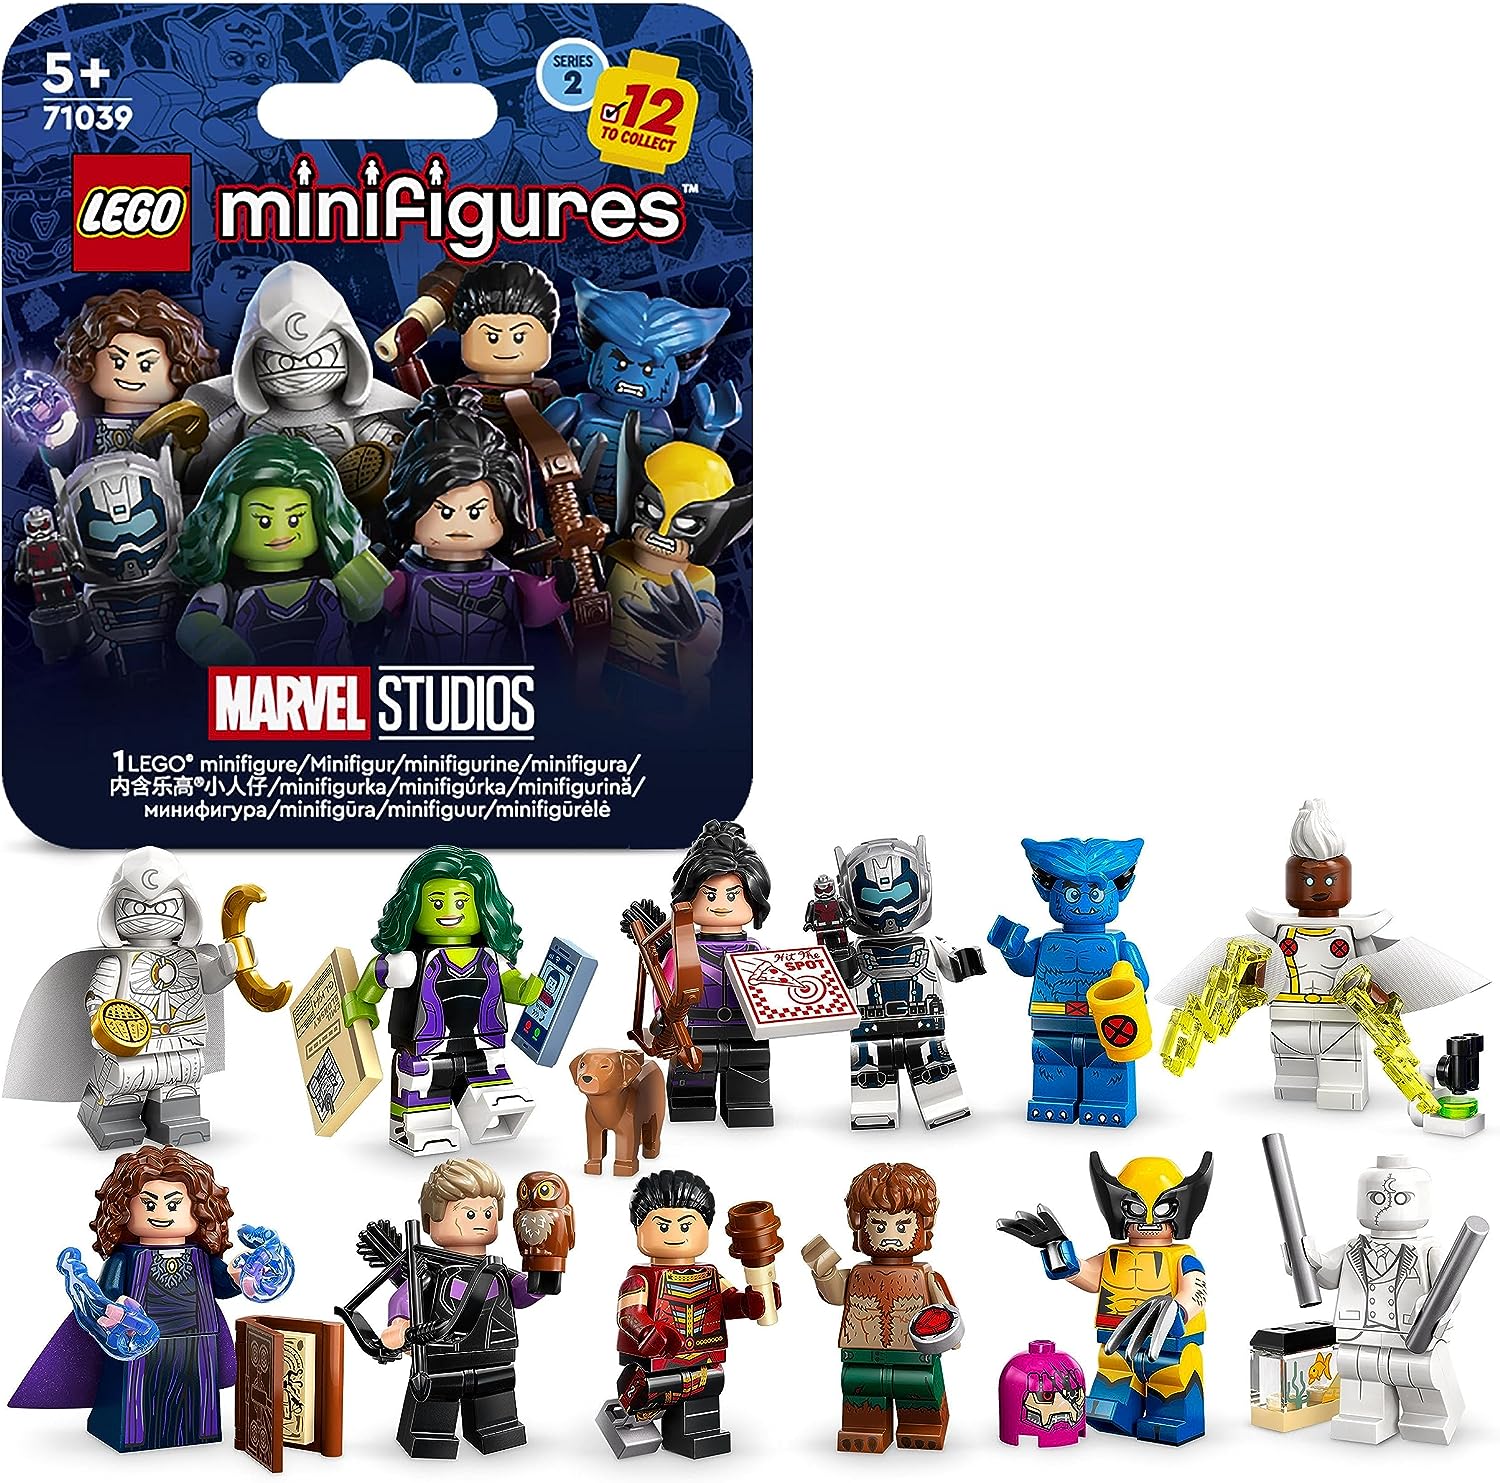 LEGO Marvel Series Mini Figures Building Kit for Ages 5+